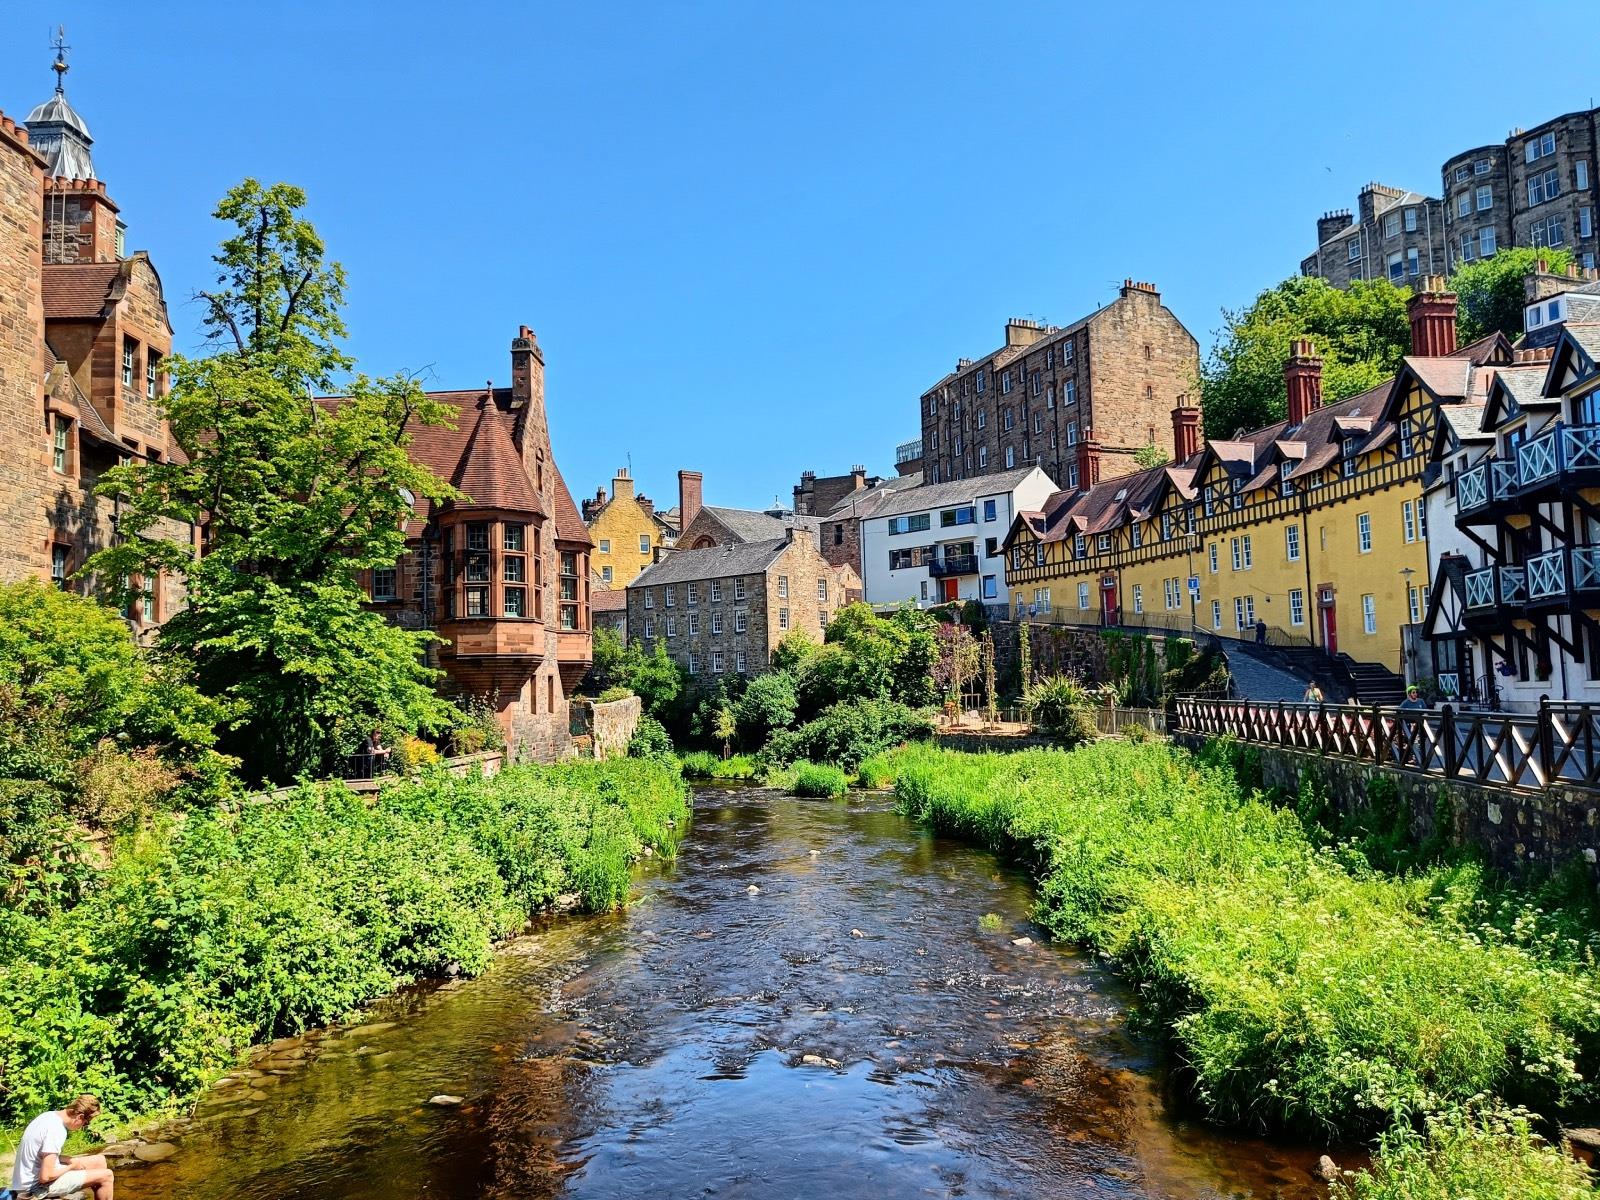 Free Tour New Town and Dean Village